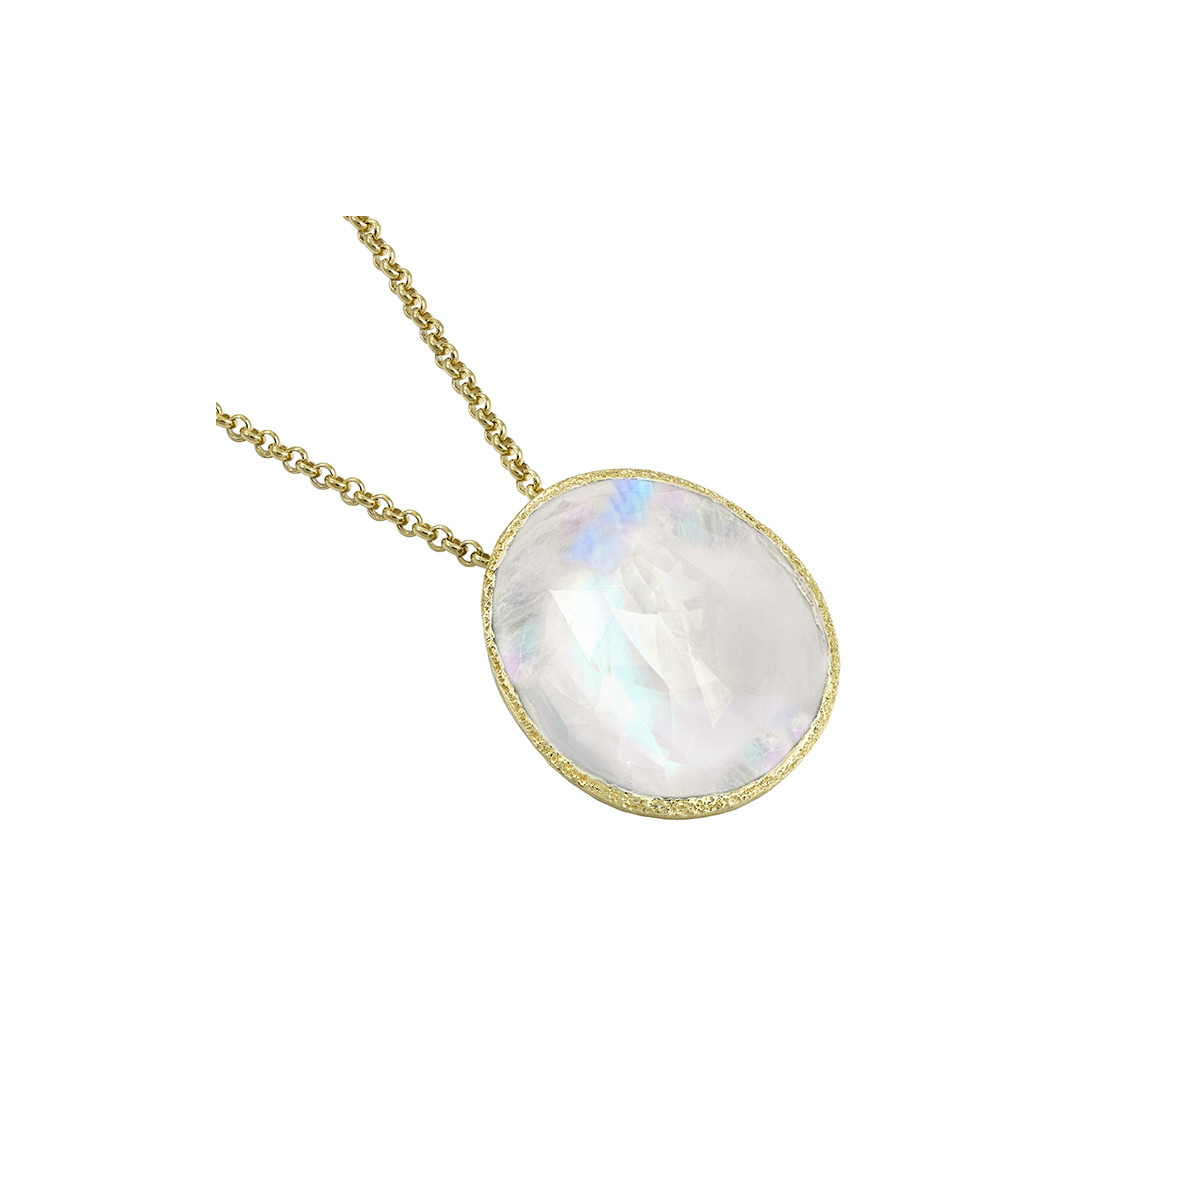 SHADE Pendant in Silver. 18k Gold Vermeil